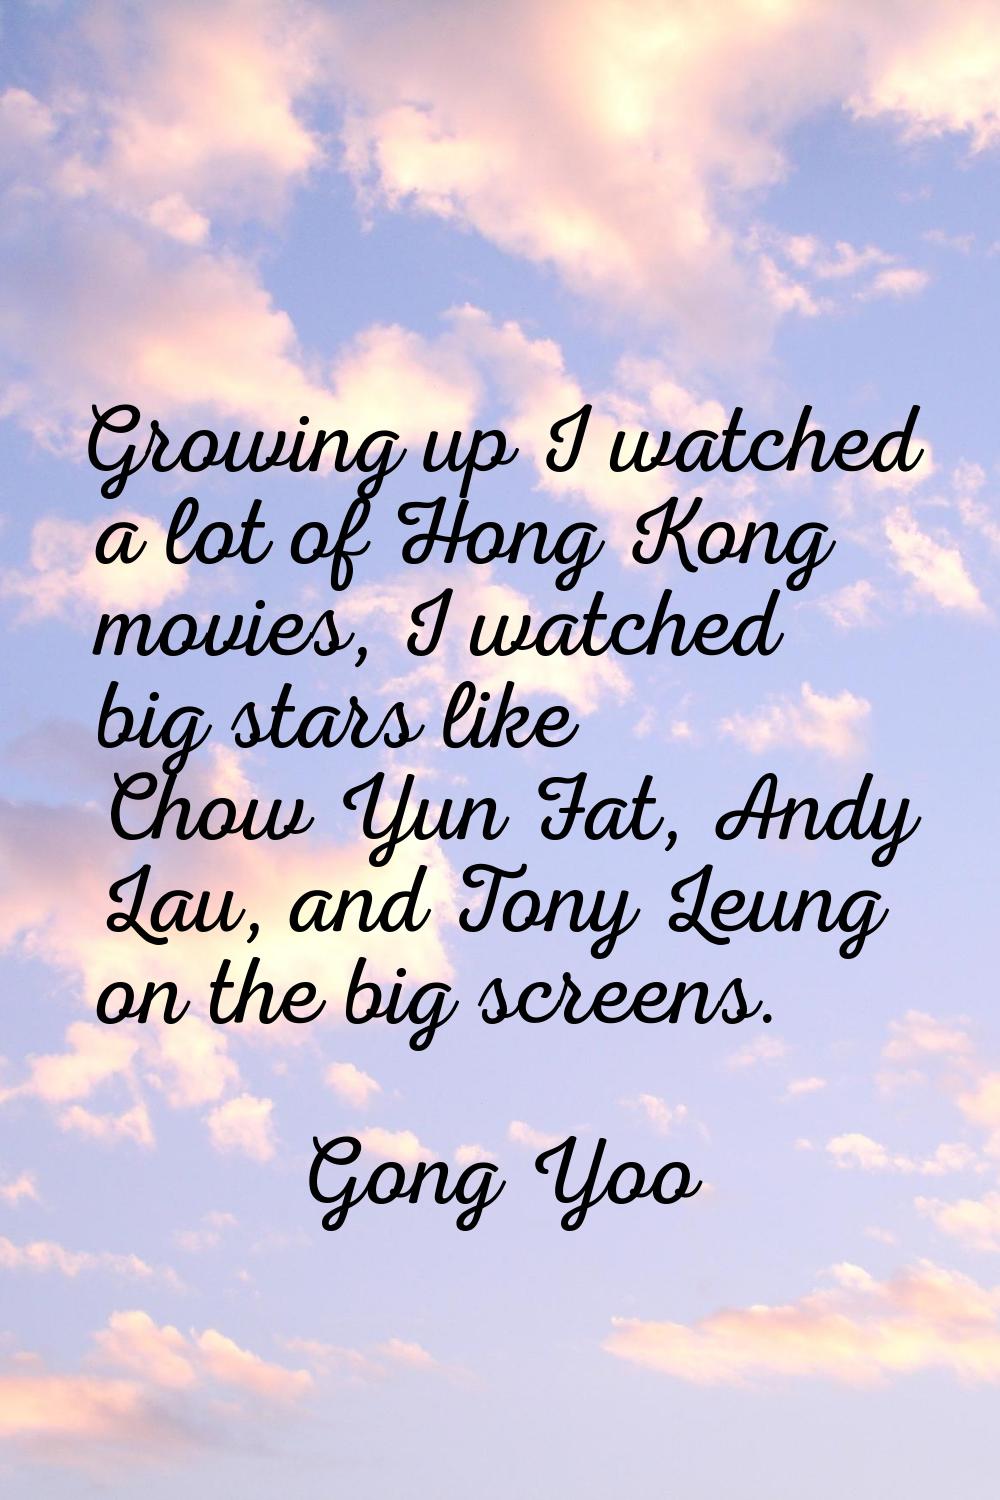 Growing up I watched a lot of Hong Kong movies, I watched big stars like Chow Yun Fat, Andy Lau, an